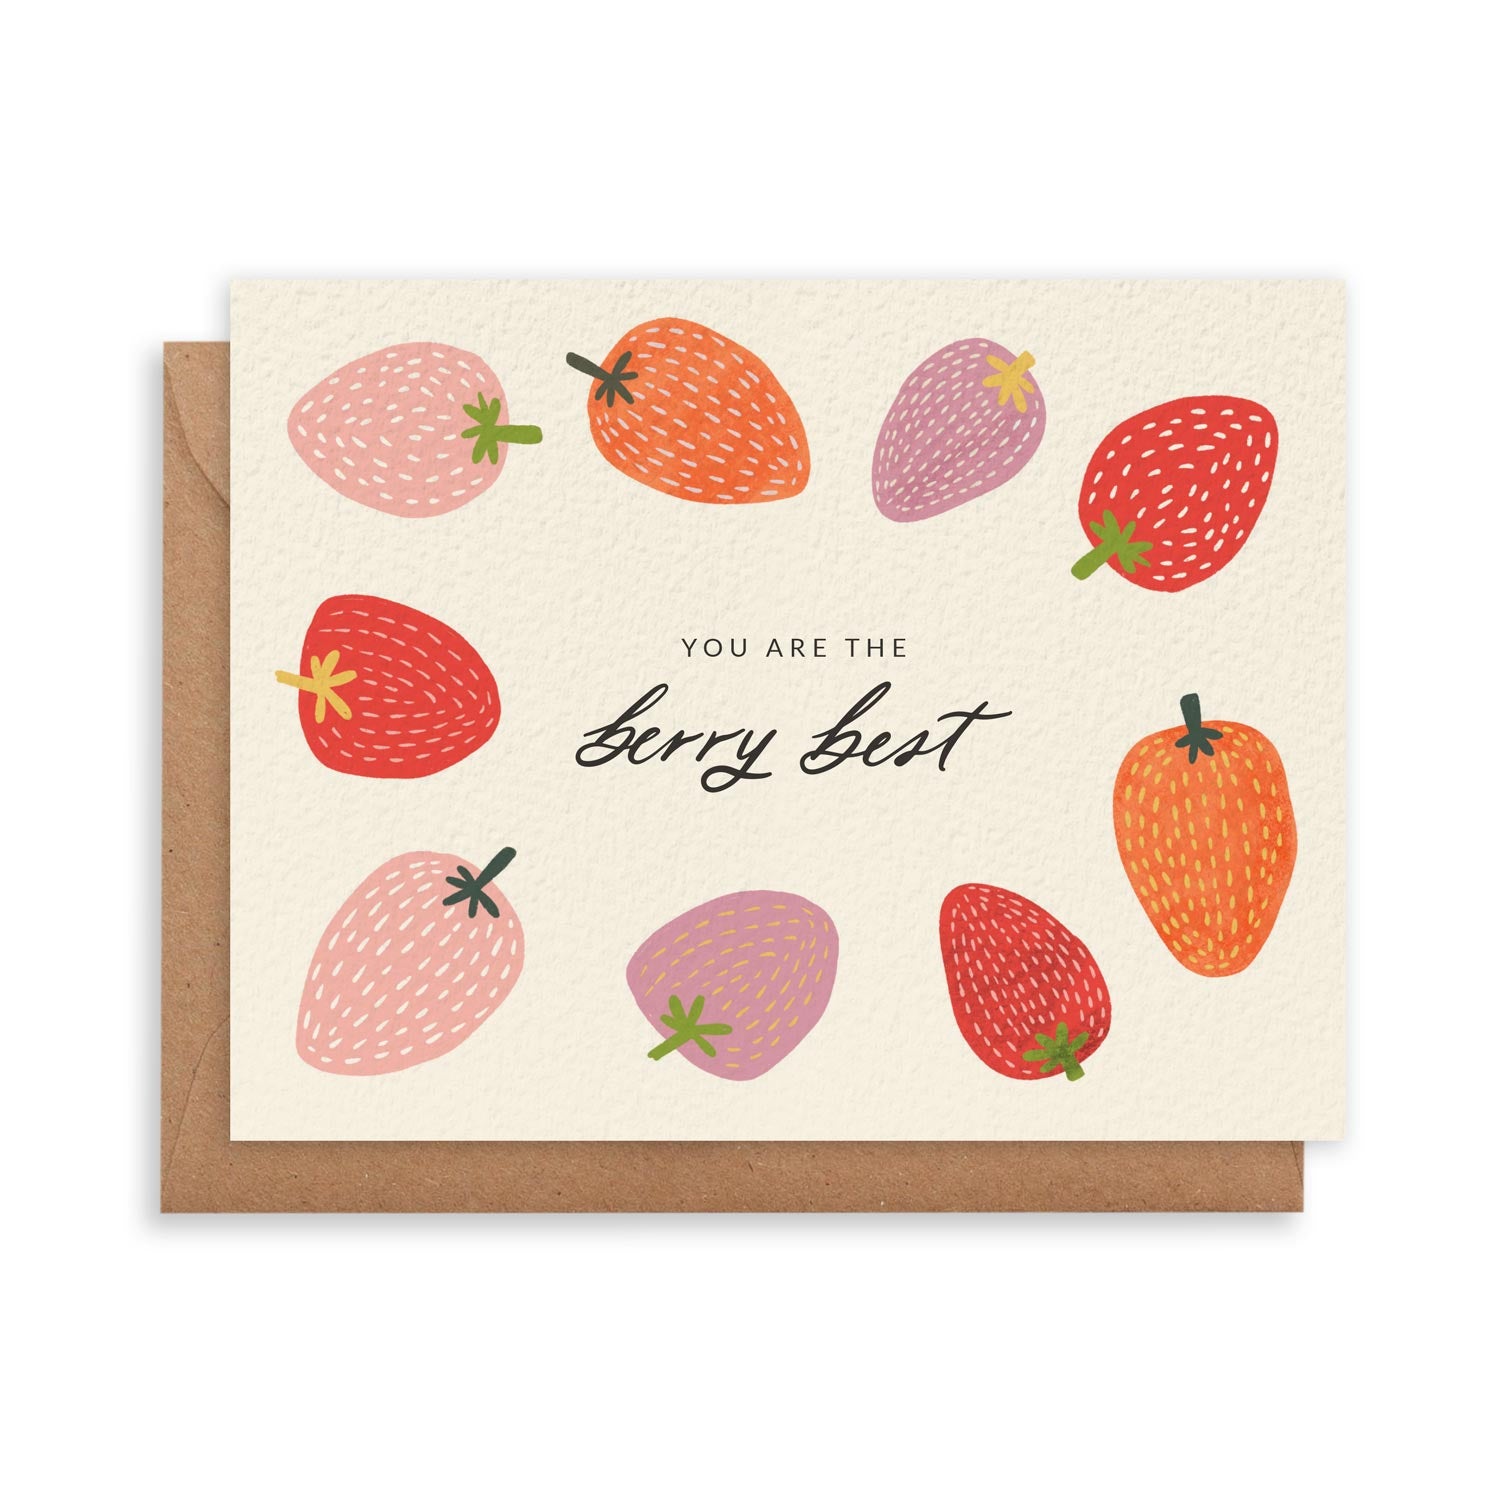 You Are The Berry Best Greeting Card with Vibrant Red, Pink, Orange Strawberries for Friendship, Birthday or Just Cause Greeting Cards